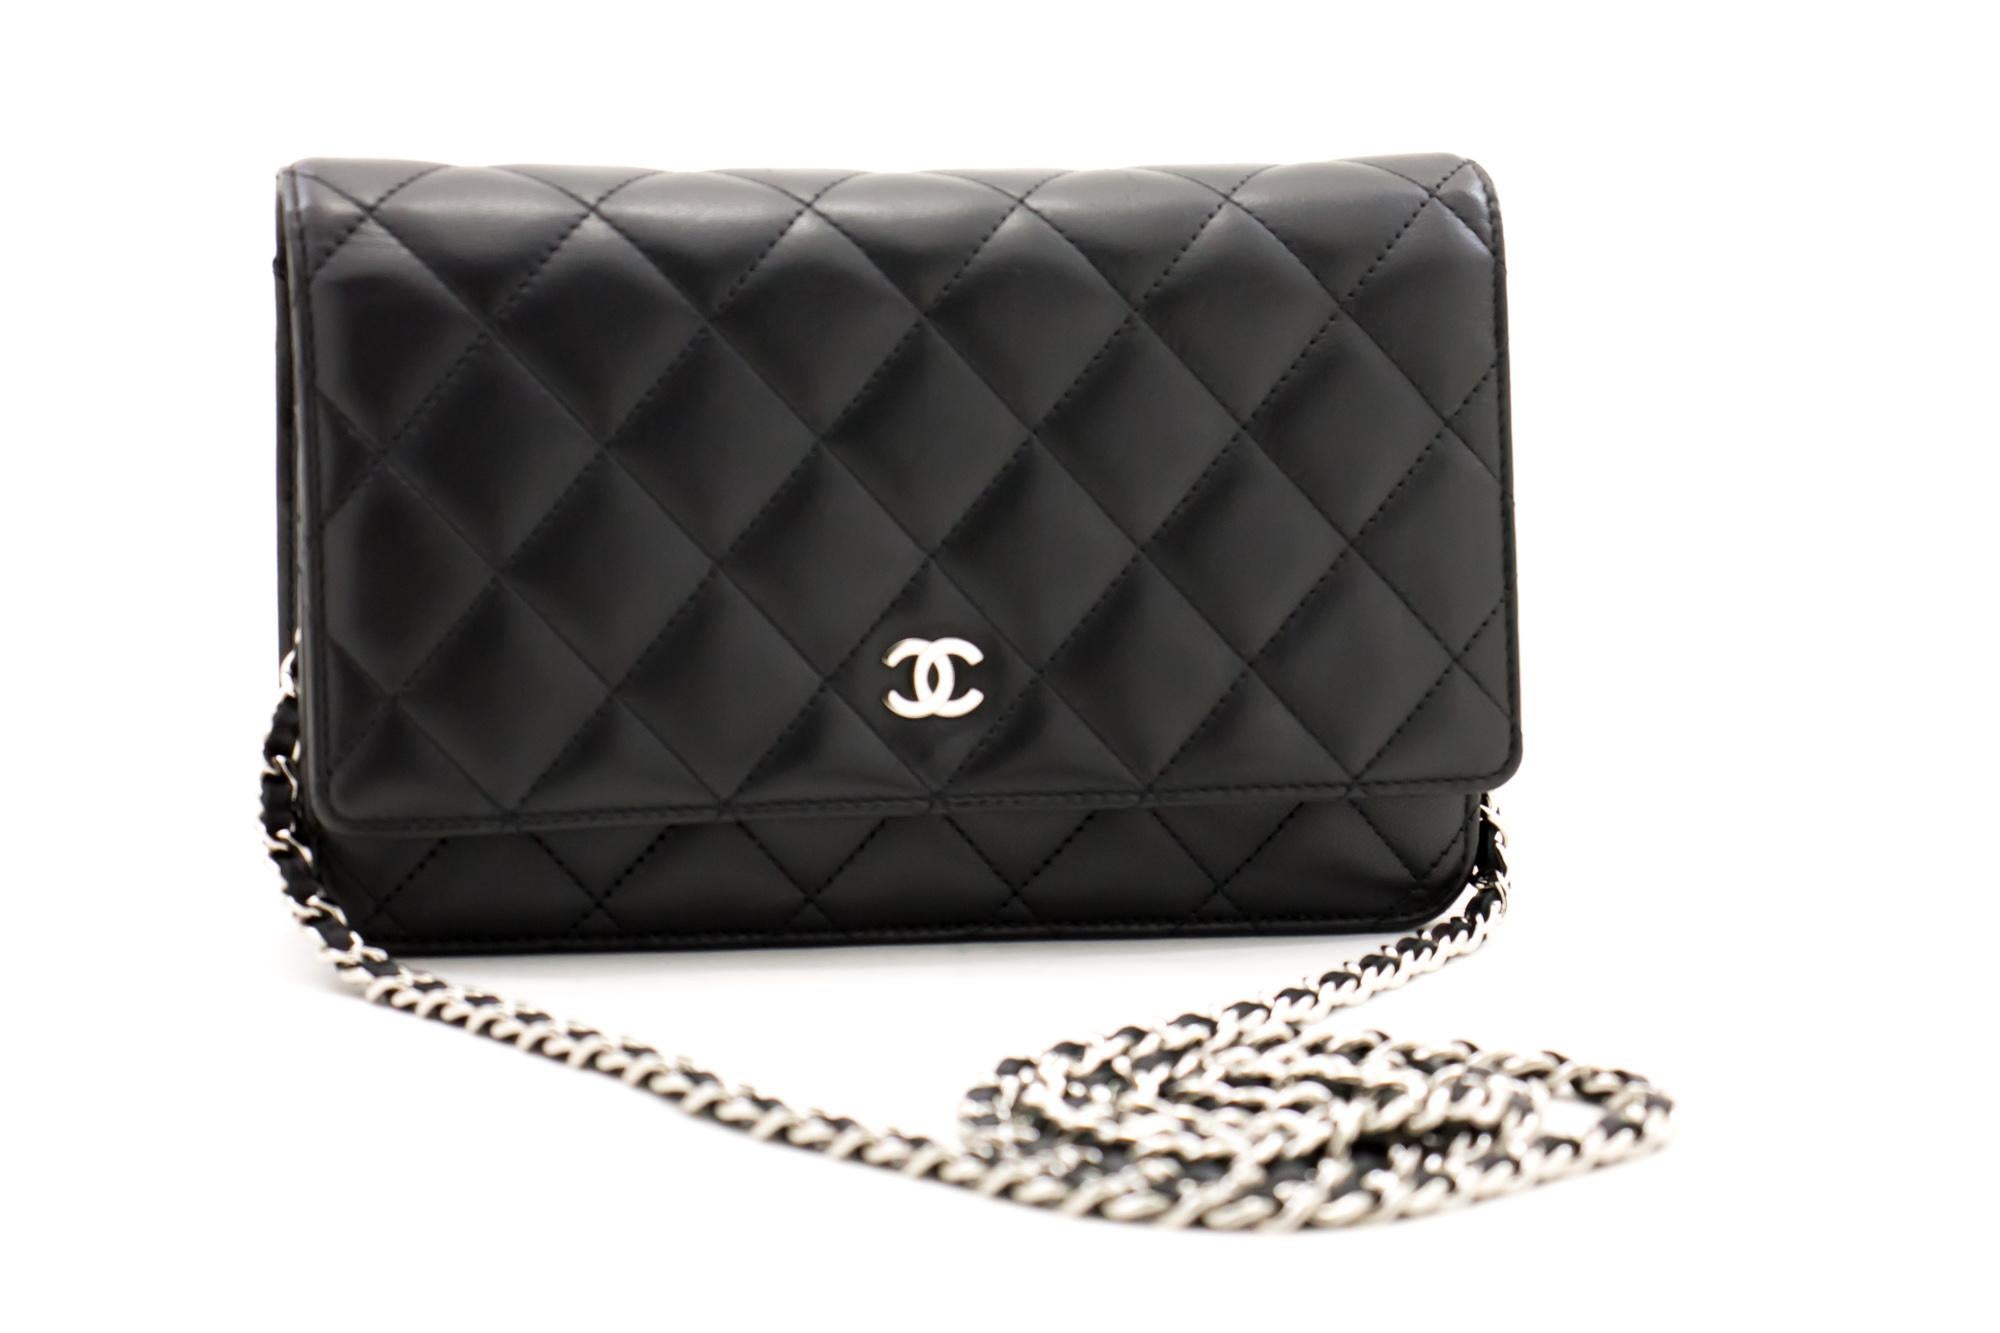 An authentic CHANEL Black Wallet On Chain WOC Shoulder Bag Crossbody made of black Lambskin. The color is Black. The outside material is Leather. The pattern is Solid. This item is Contemporary. The year of manufacture would be 2012.
Conditions &